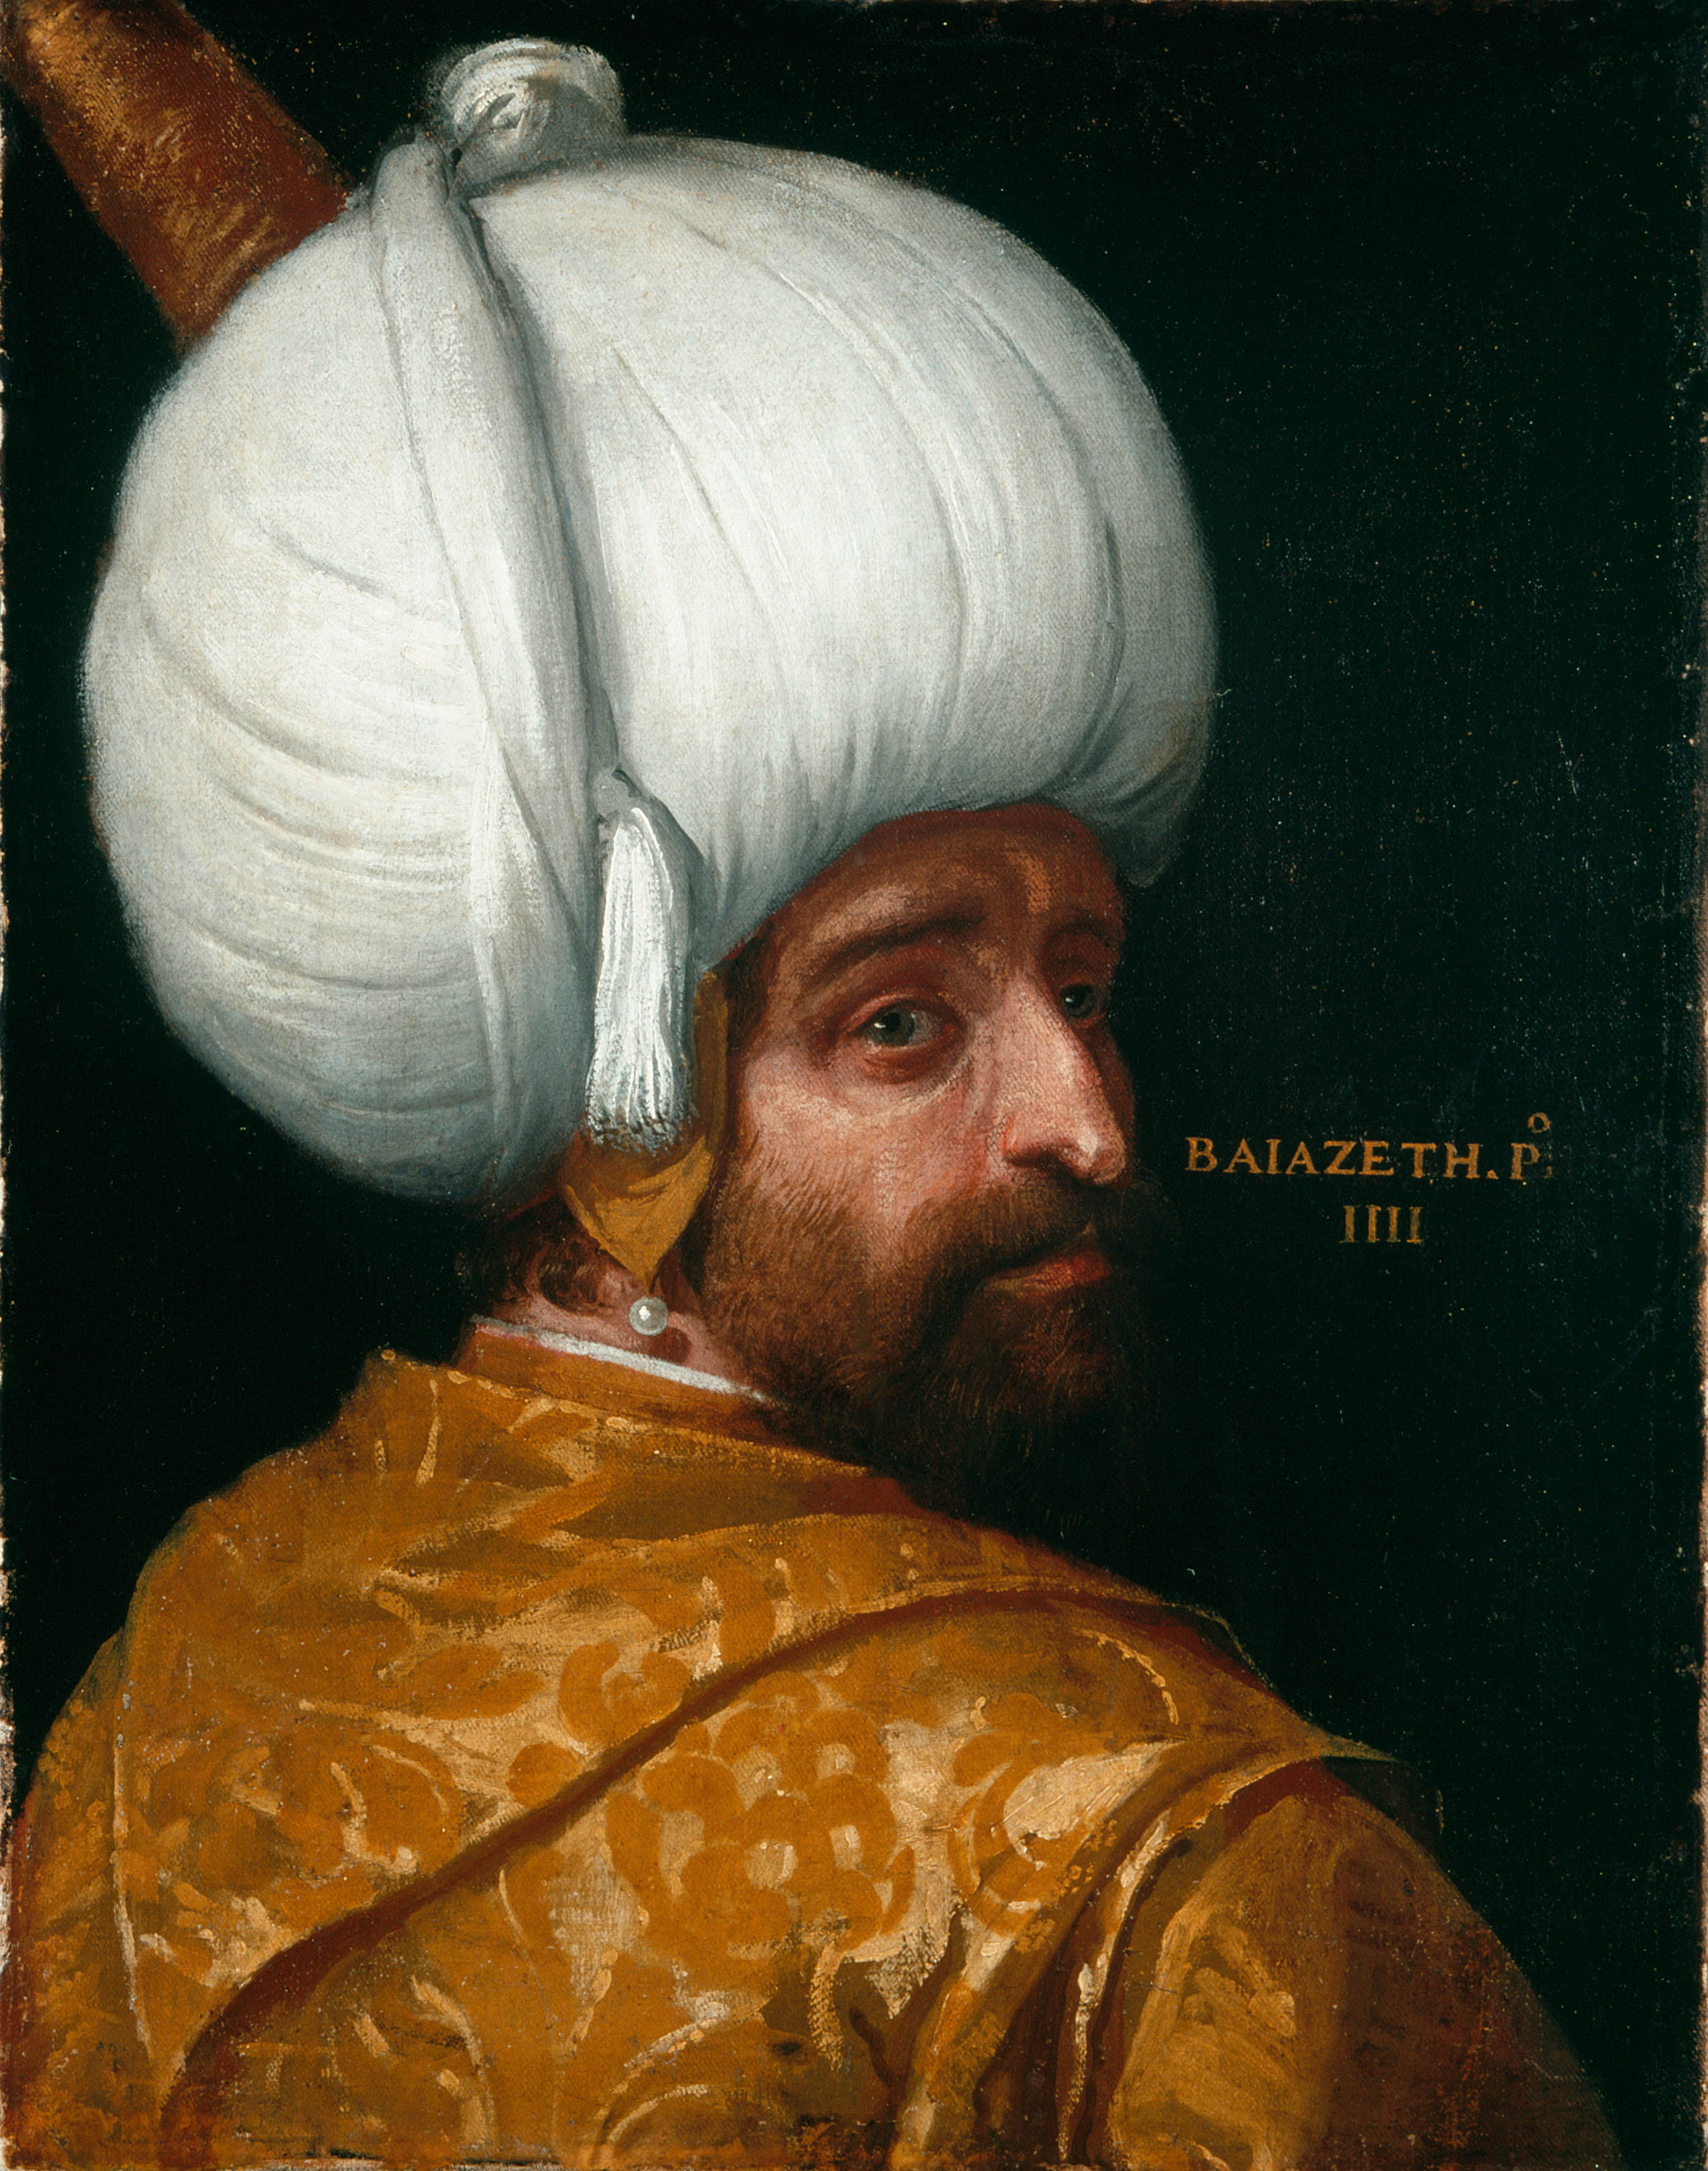 Sultan Bayezid I by Paolo Veronese (and workshop) - ca. 1575 - 68,5 x 54 cm 